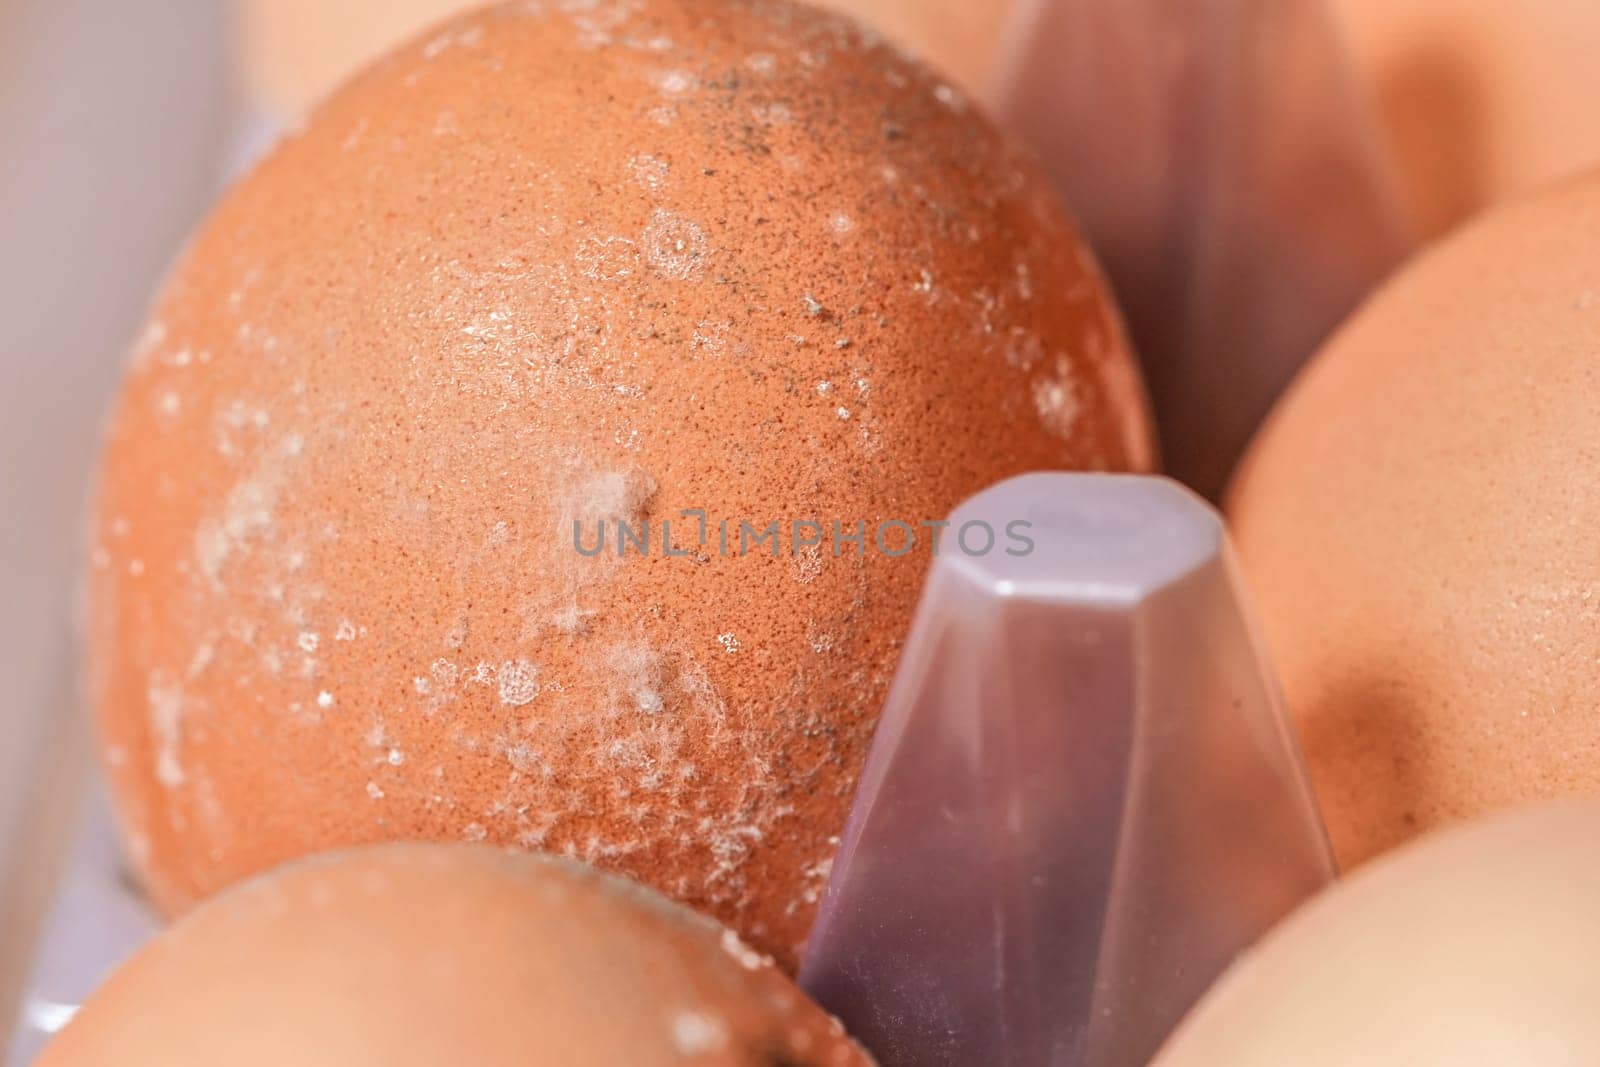 White mould / mildew closeup on egg shells - eggs gone bad after storing in wet conditions for long time by Ivanko